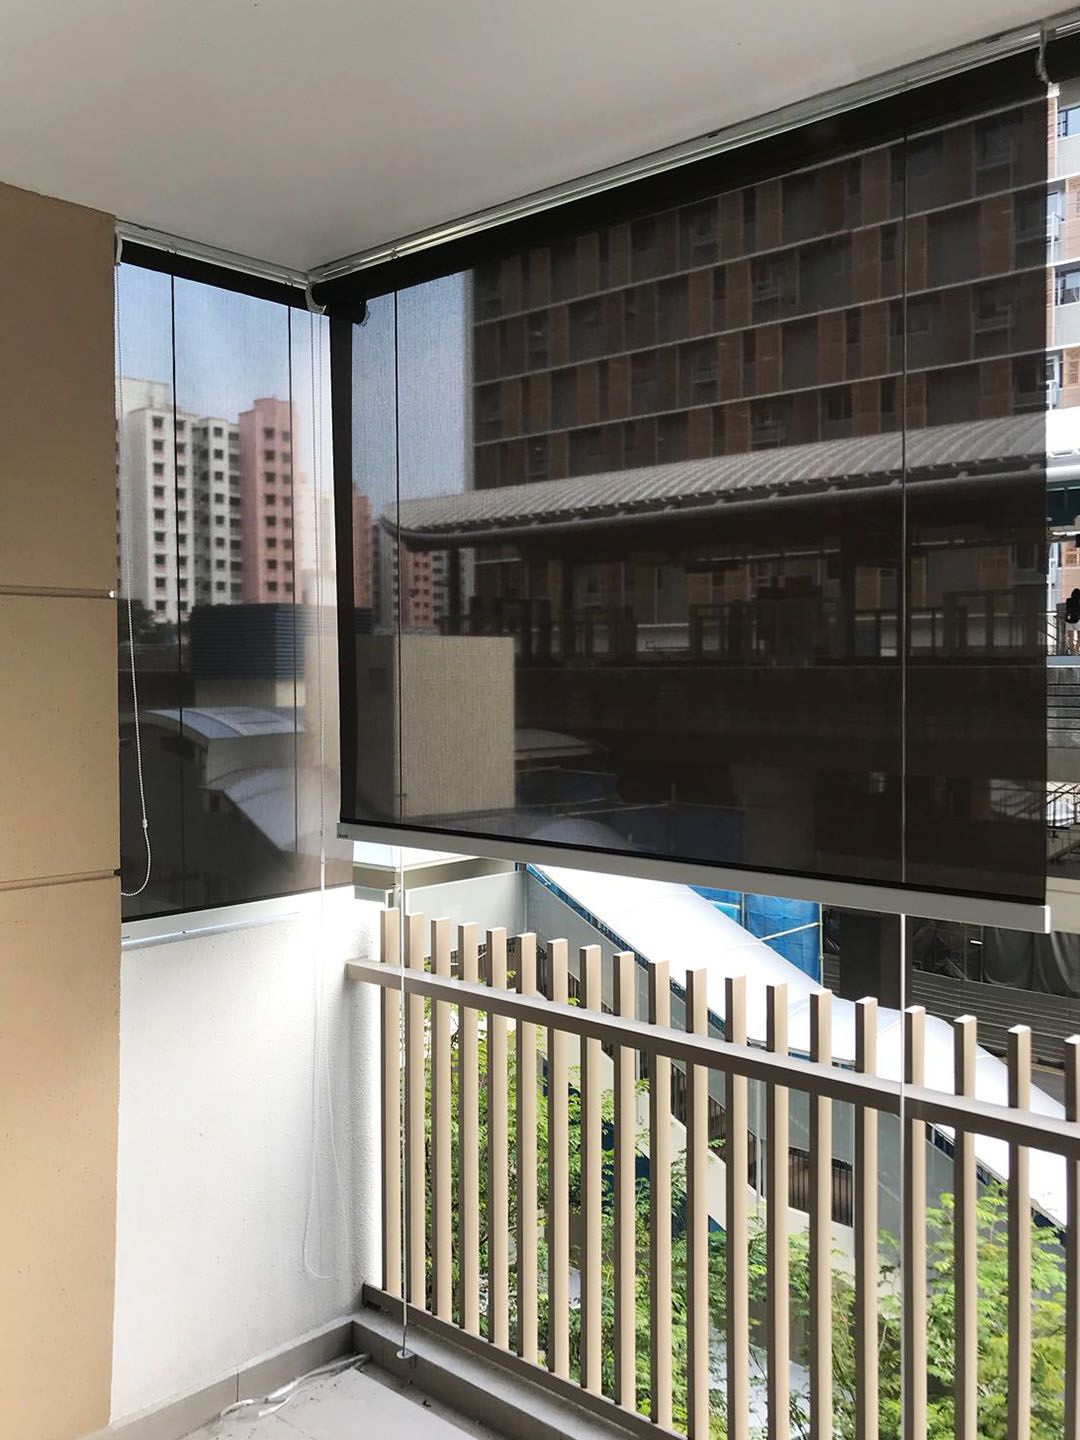 Outdoor roller blinds in an apartment balcony